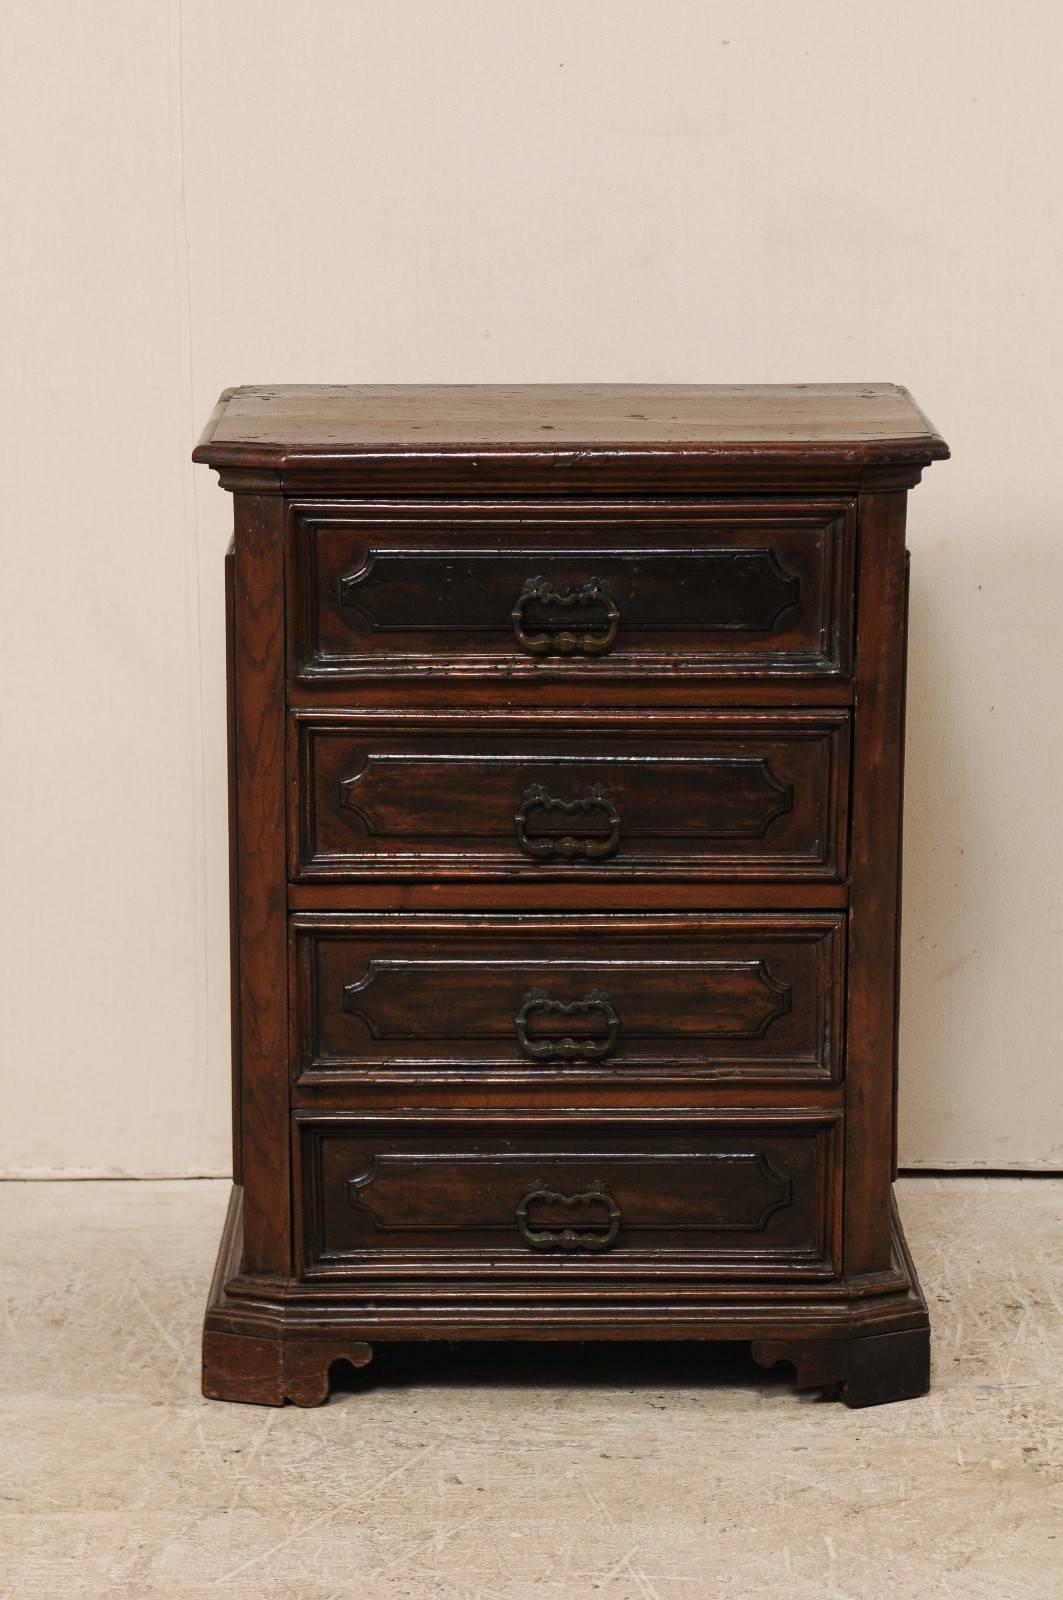 An Italian late 18th century four-drawer cabinet. This antique Italian chest of rich walnut features beautifully carved panelled drawers and side panels. The top is bevelled, or chamfered, and the four drawers are adorned with decorative pulls at